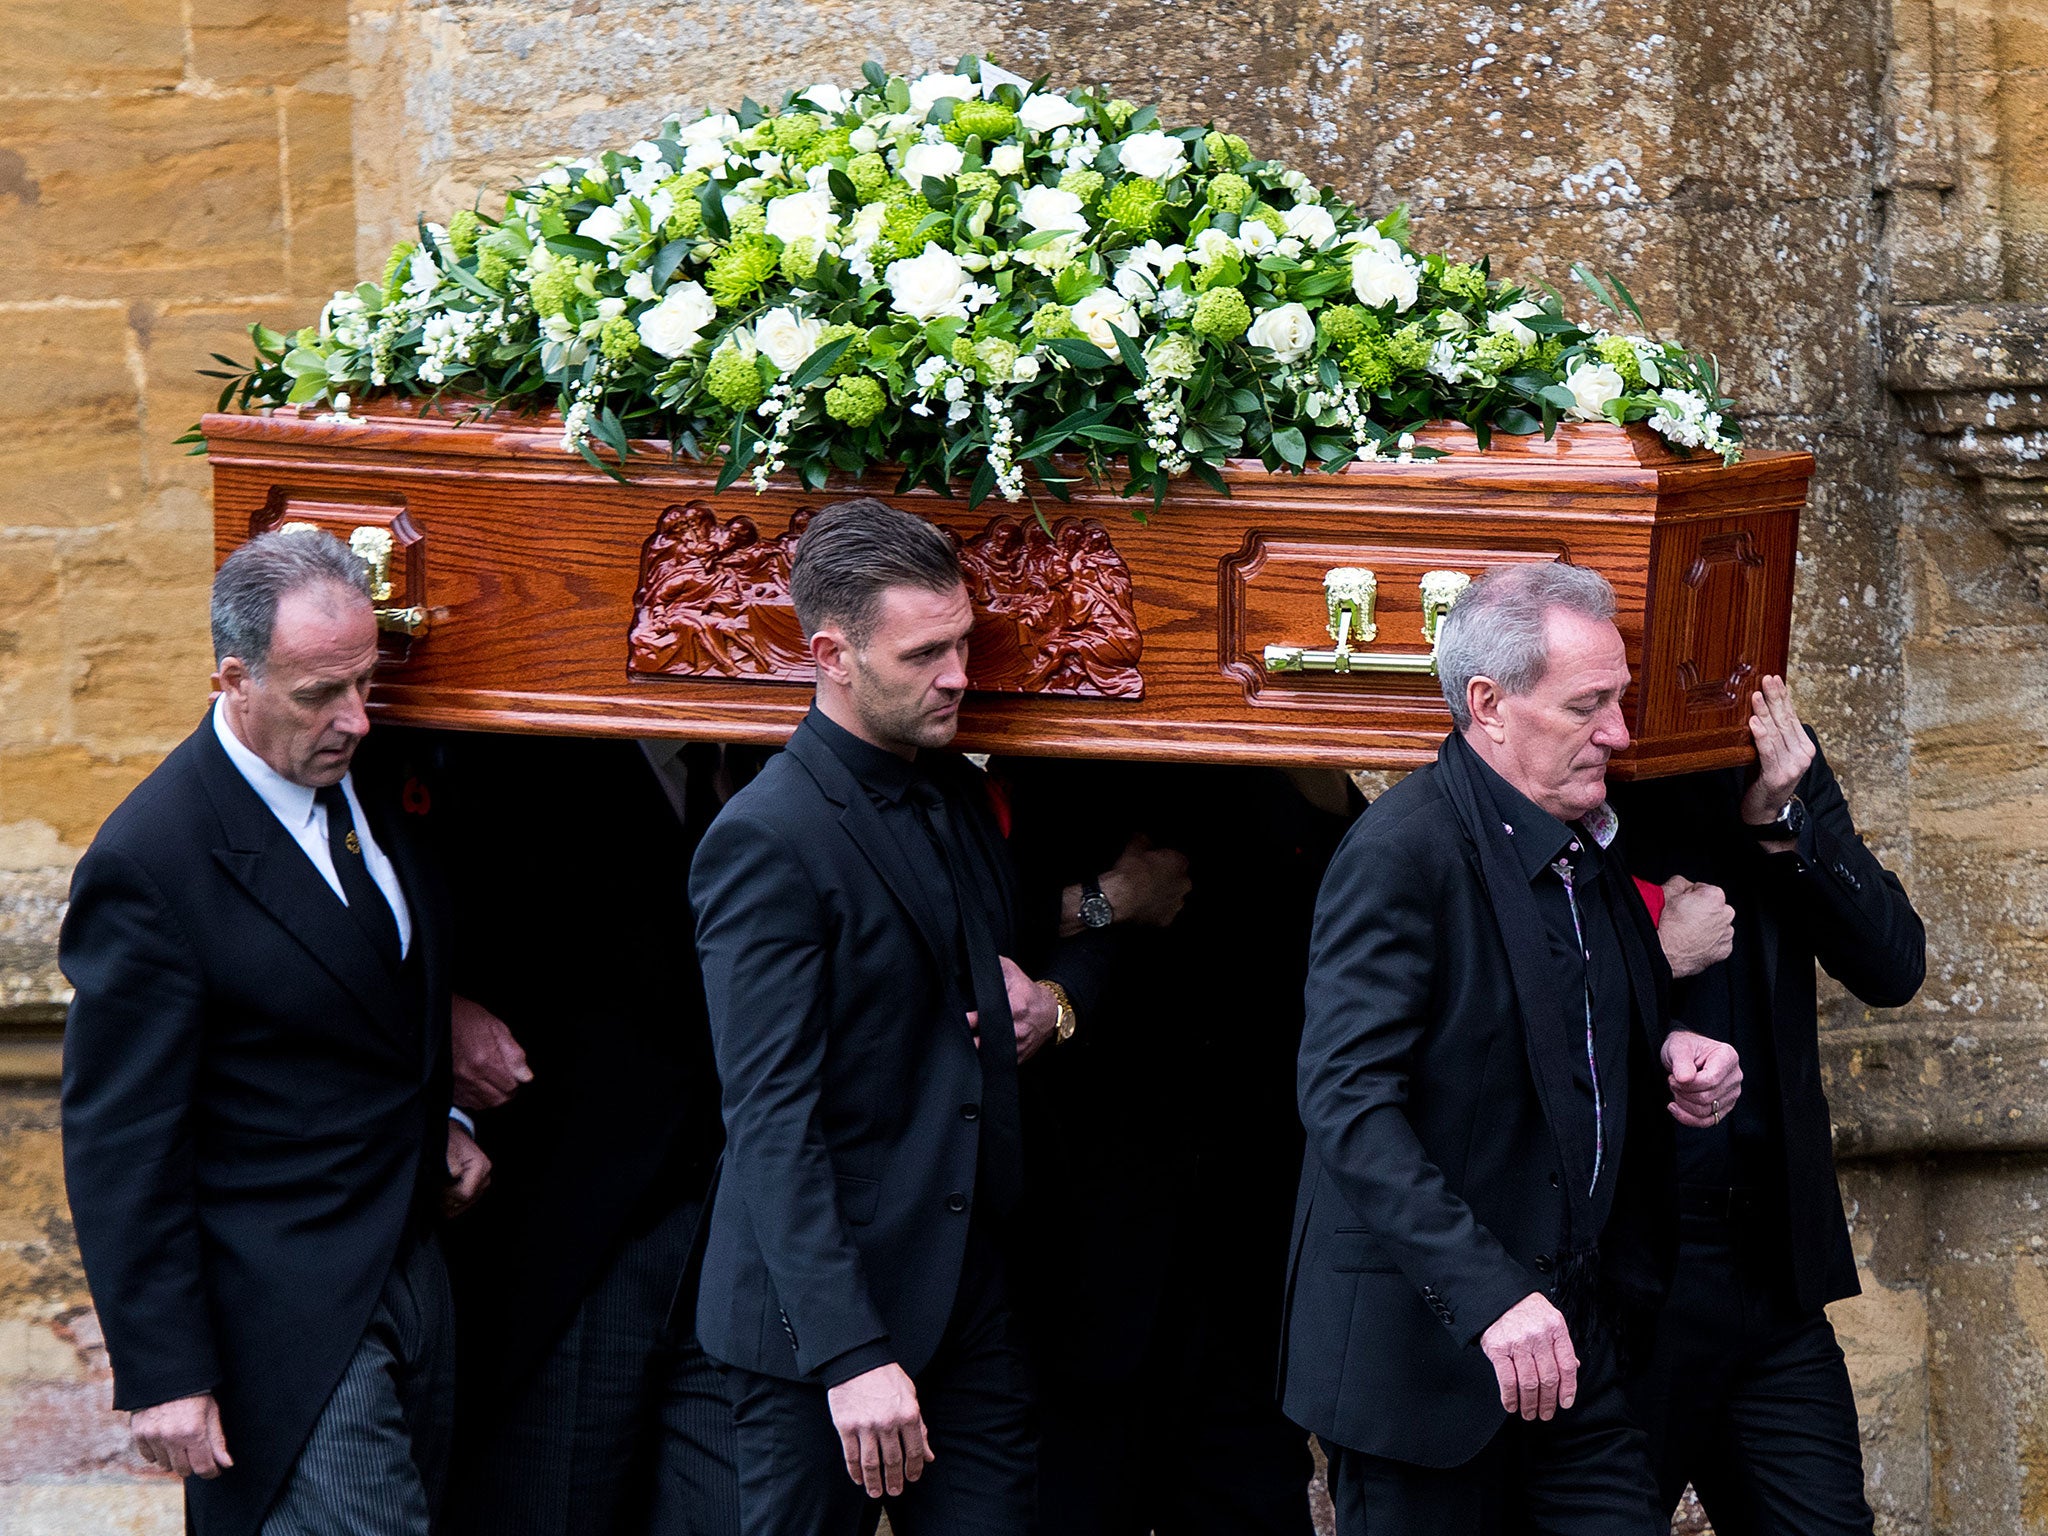 Lynda Bellinghams husband Michael Pattemore and sons carry her coffin into the church during her funeral